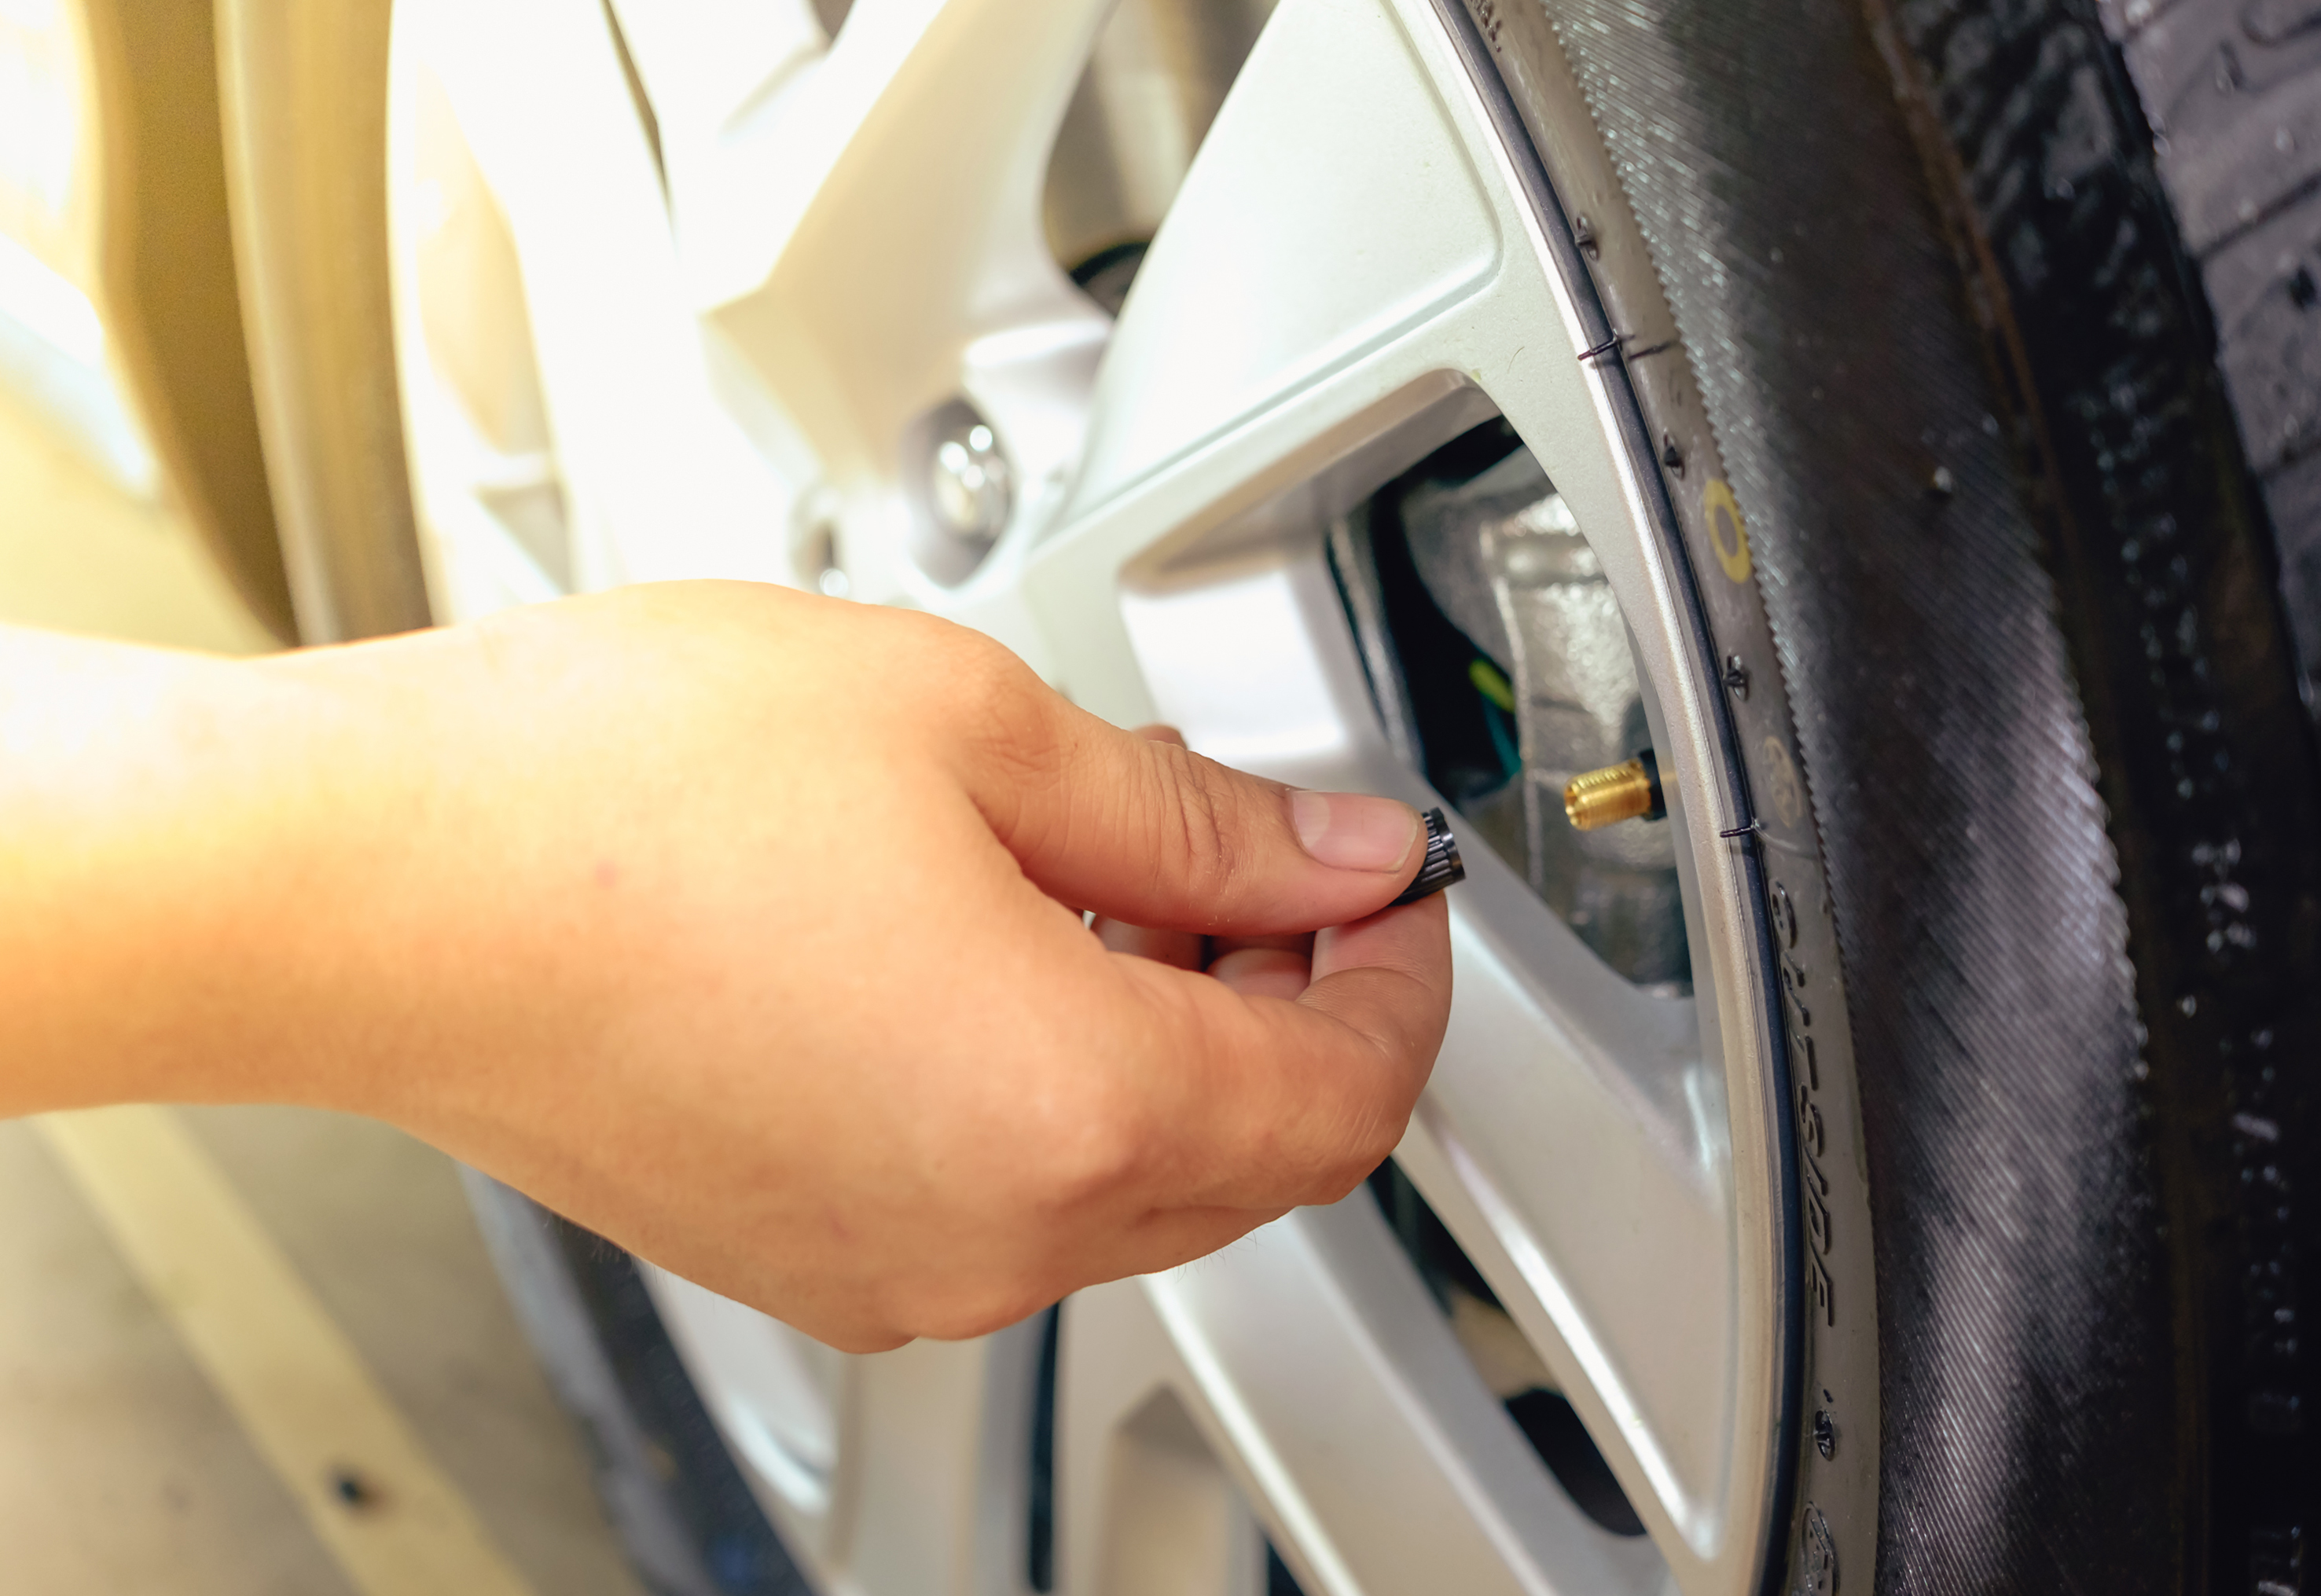 Tyre safety tips for all drivers